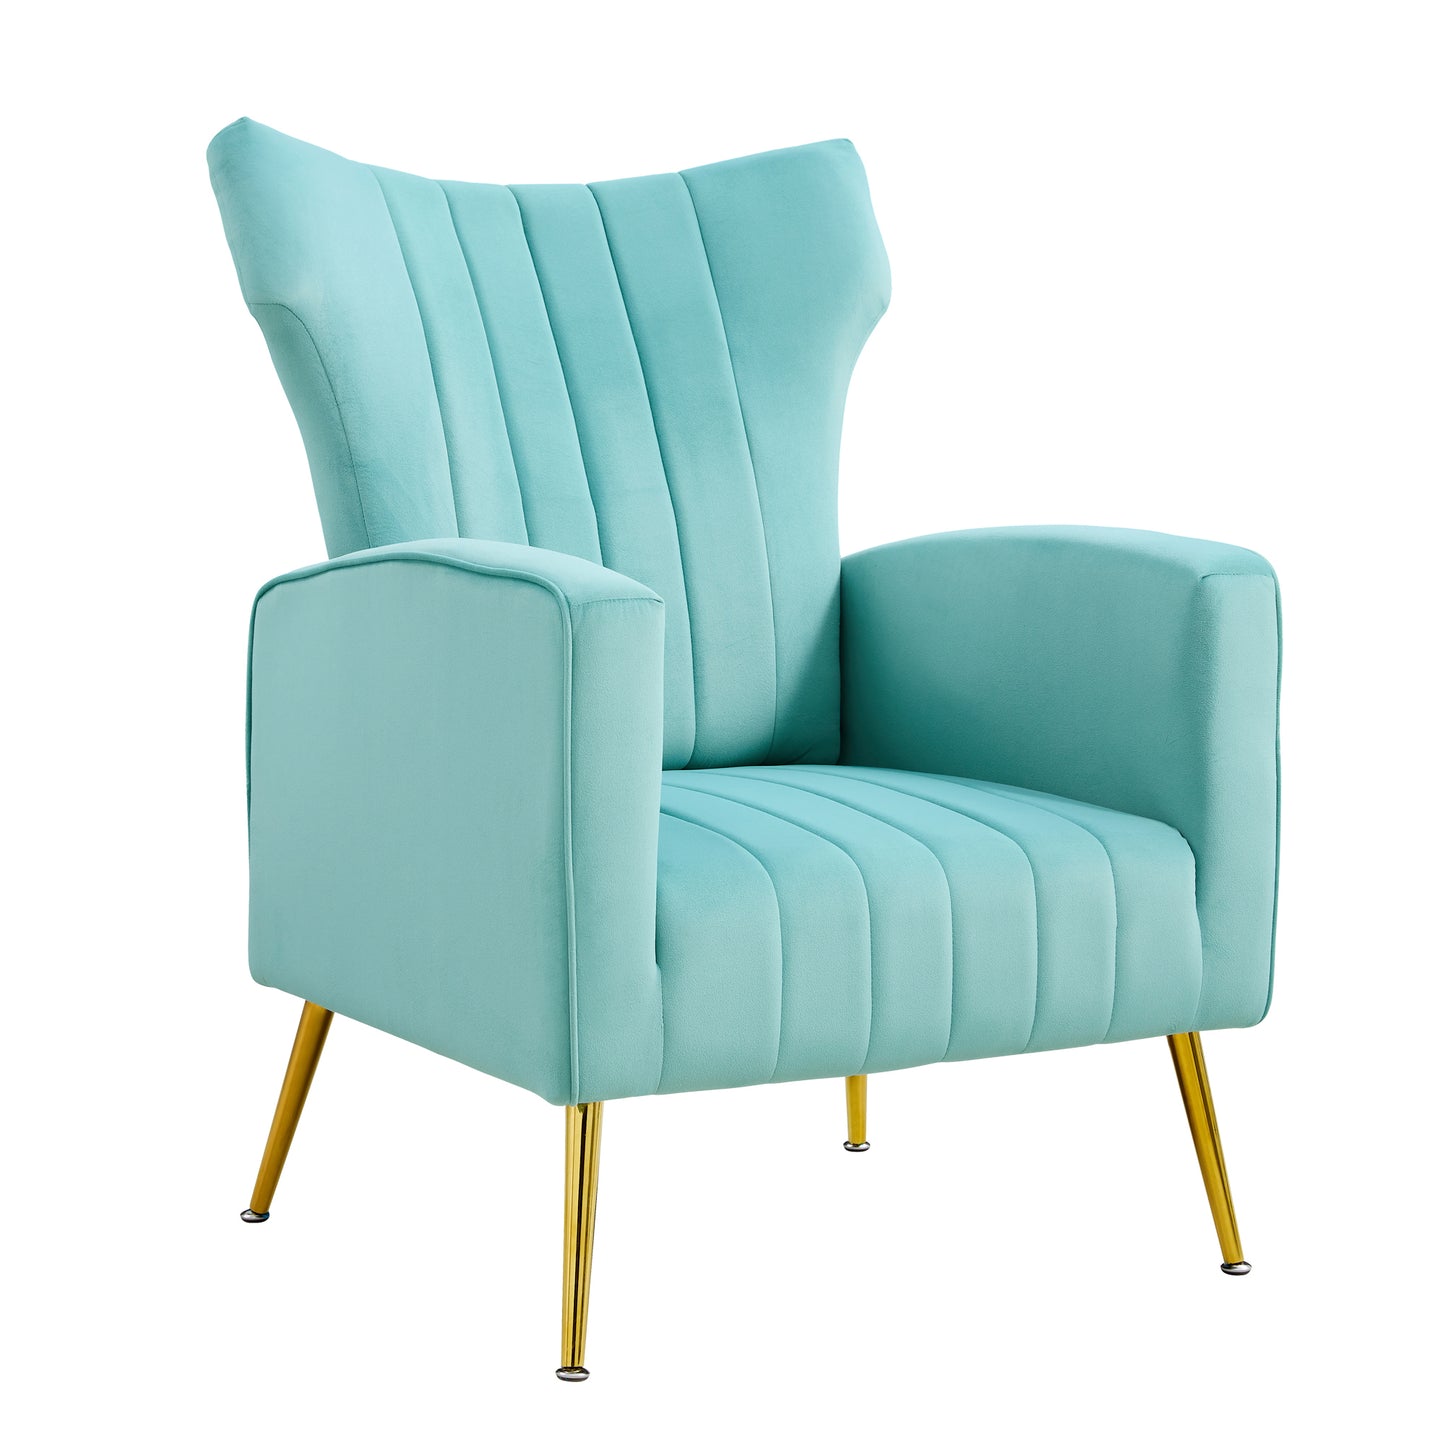 Modern Velvet Accent Chair with Arms, Wingback Reading Chair with Gold Metal Legs, Comfy Upholstered Single Leisure Sofa for Living Room Bedroom Club(Velvet+Blue)SF-001-LB